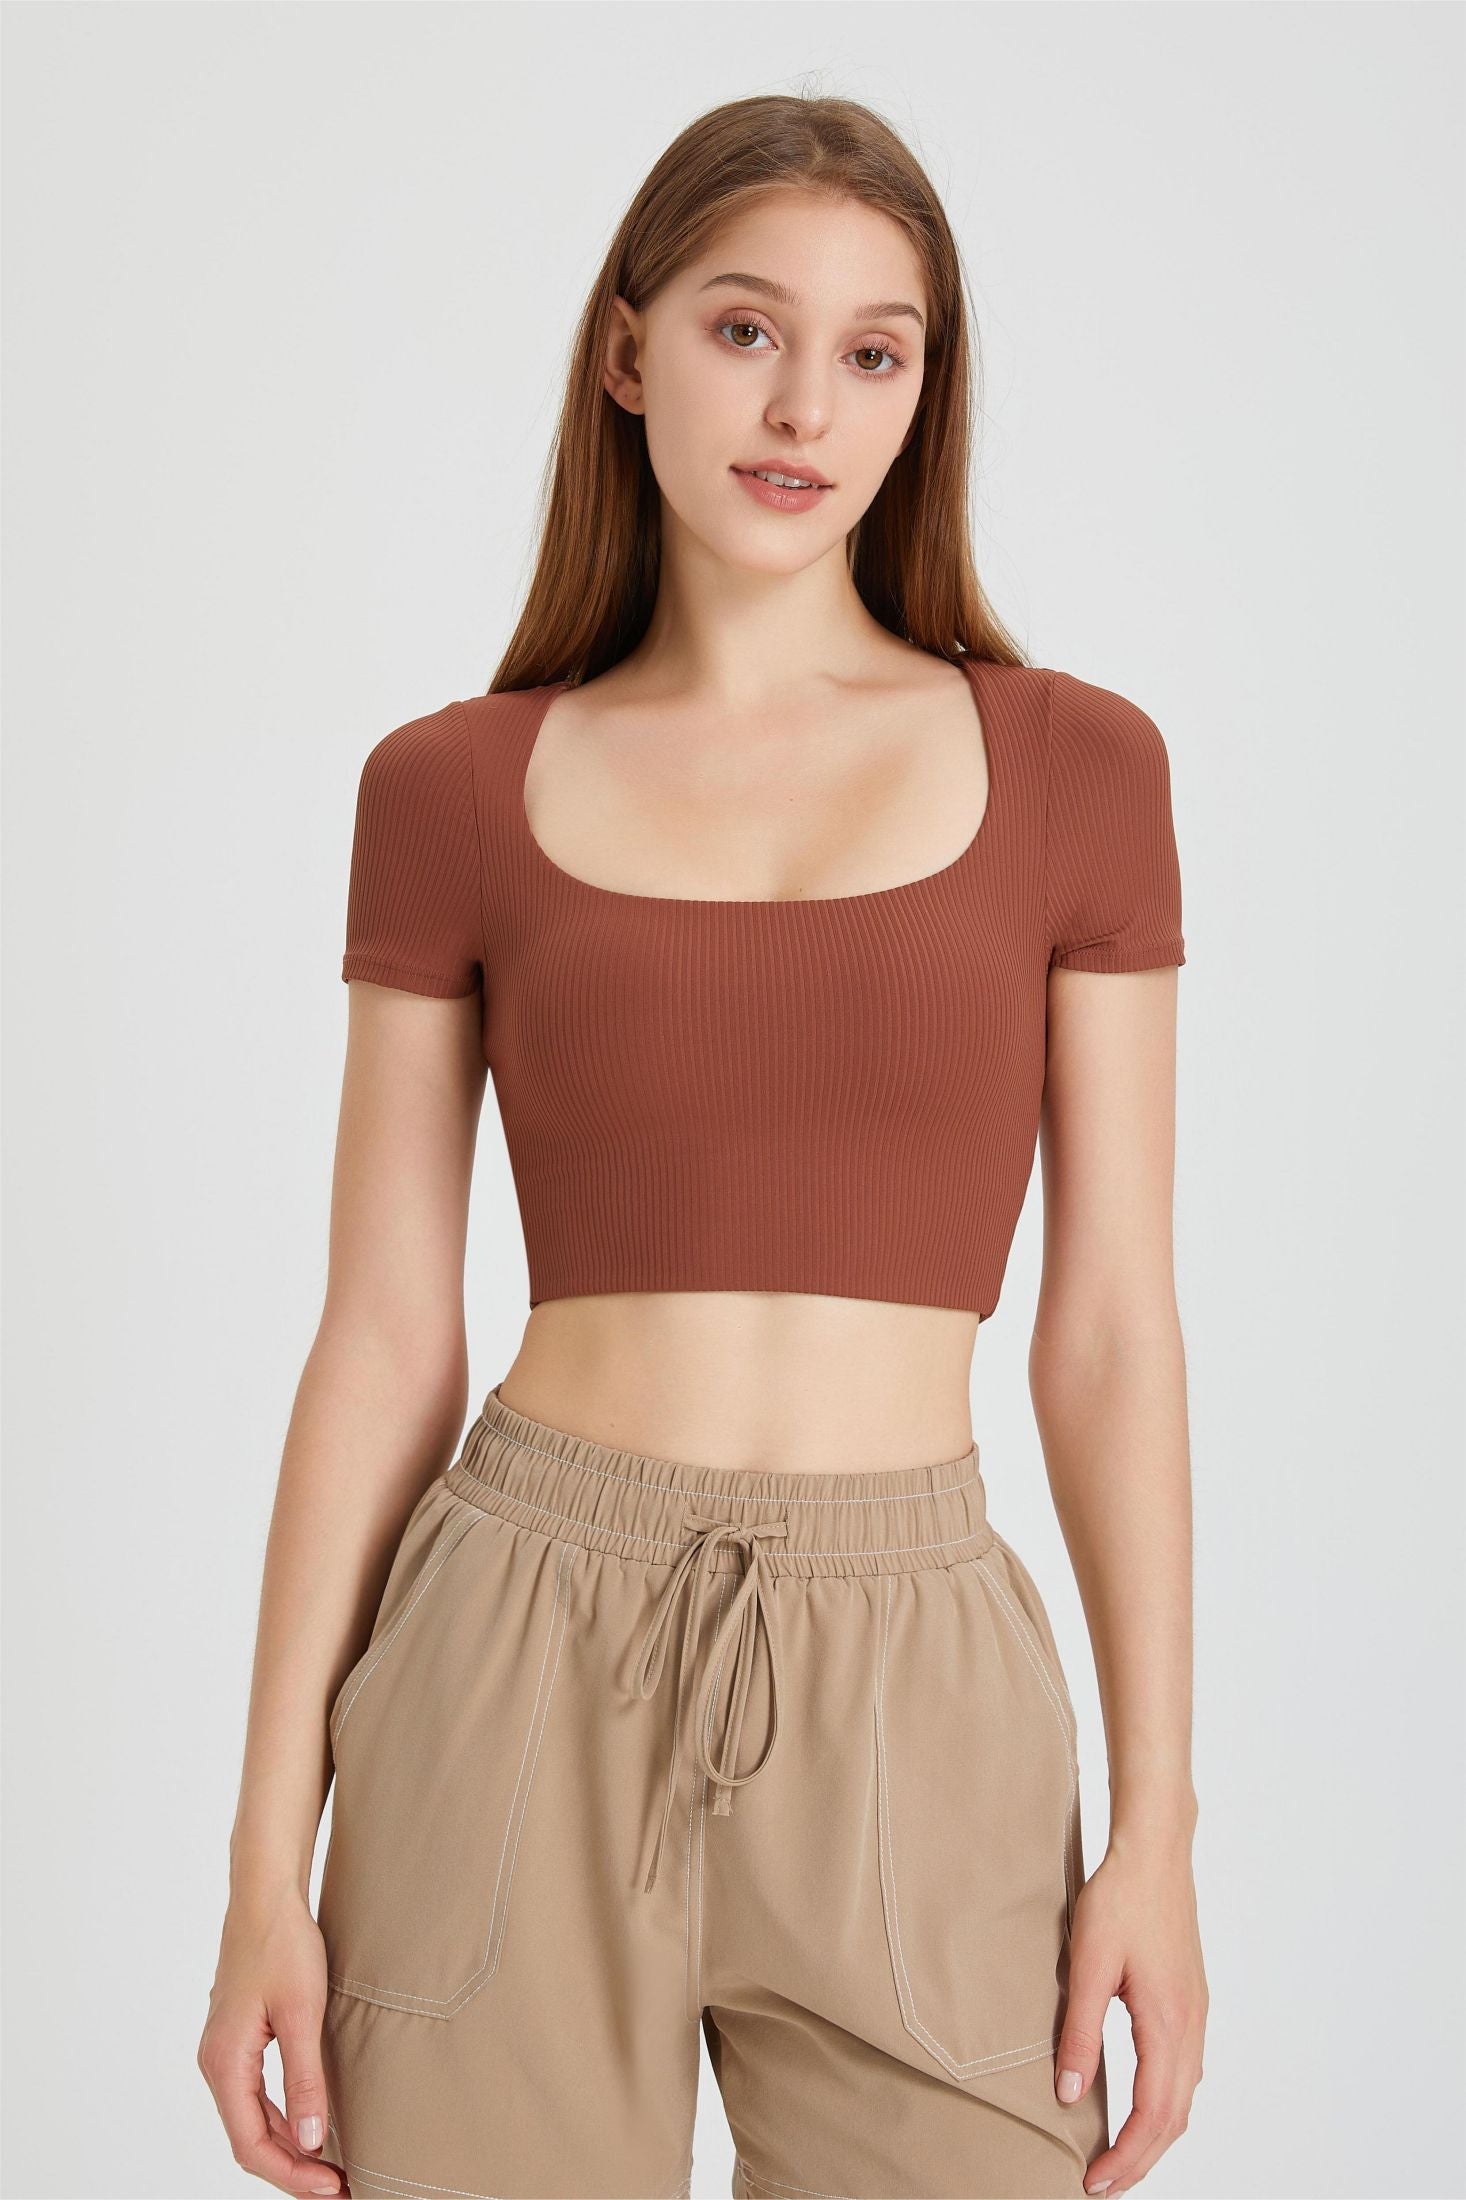 Ribbed Short Sleeve Crop Tops with Built-In Bra For Women – Zioccie